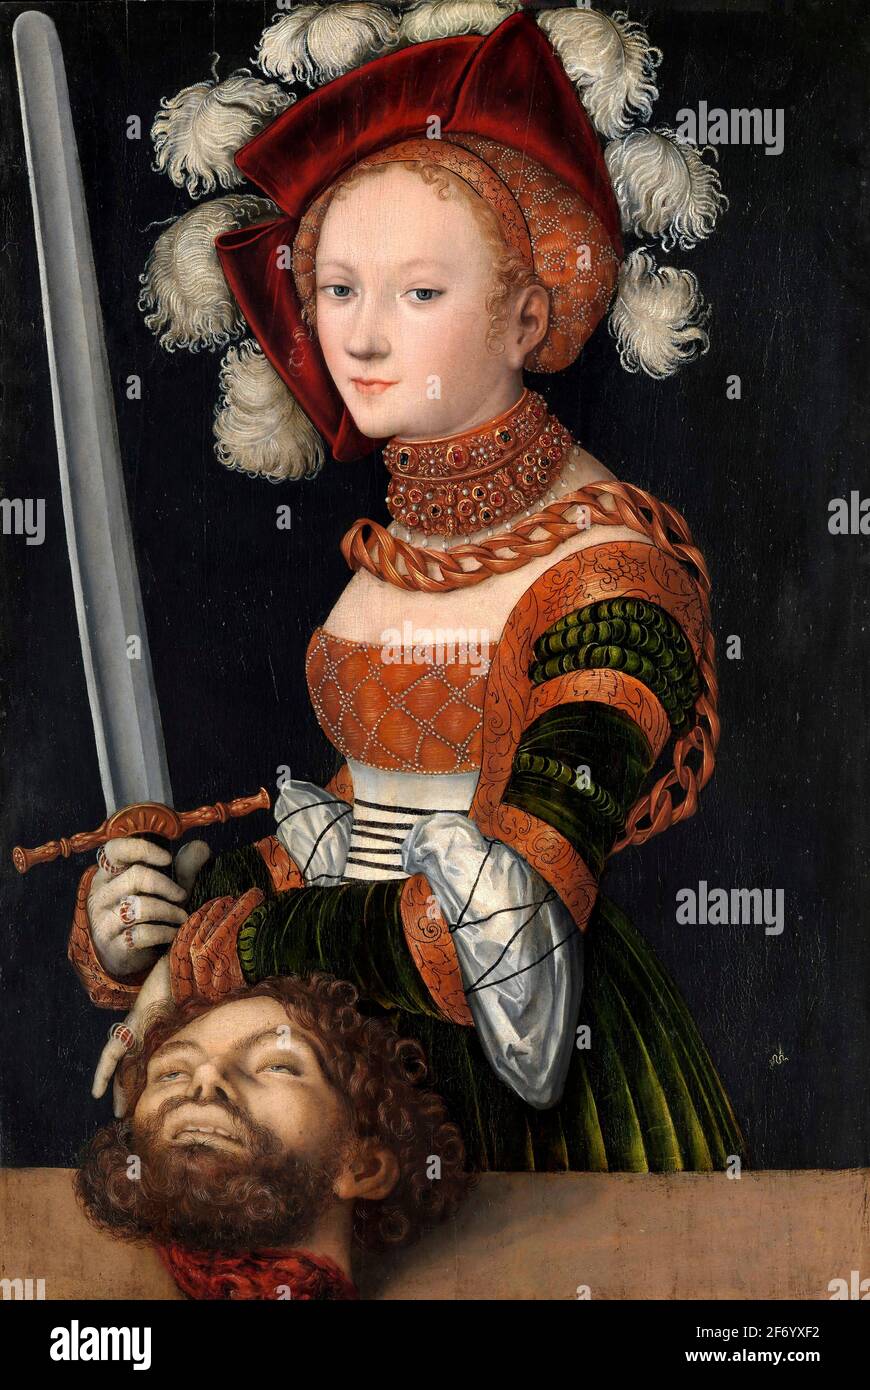 Judith with the Head of Holofernes by Lucas Cranach the Elder (1472-1553), oil on panel, c.1530. Metropolitan Museum of Art, NY version. Stock Photo